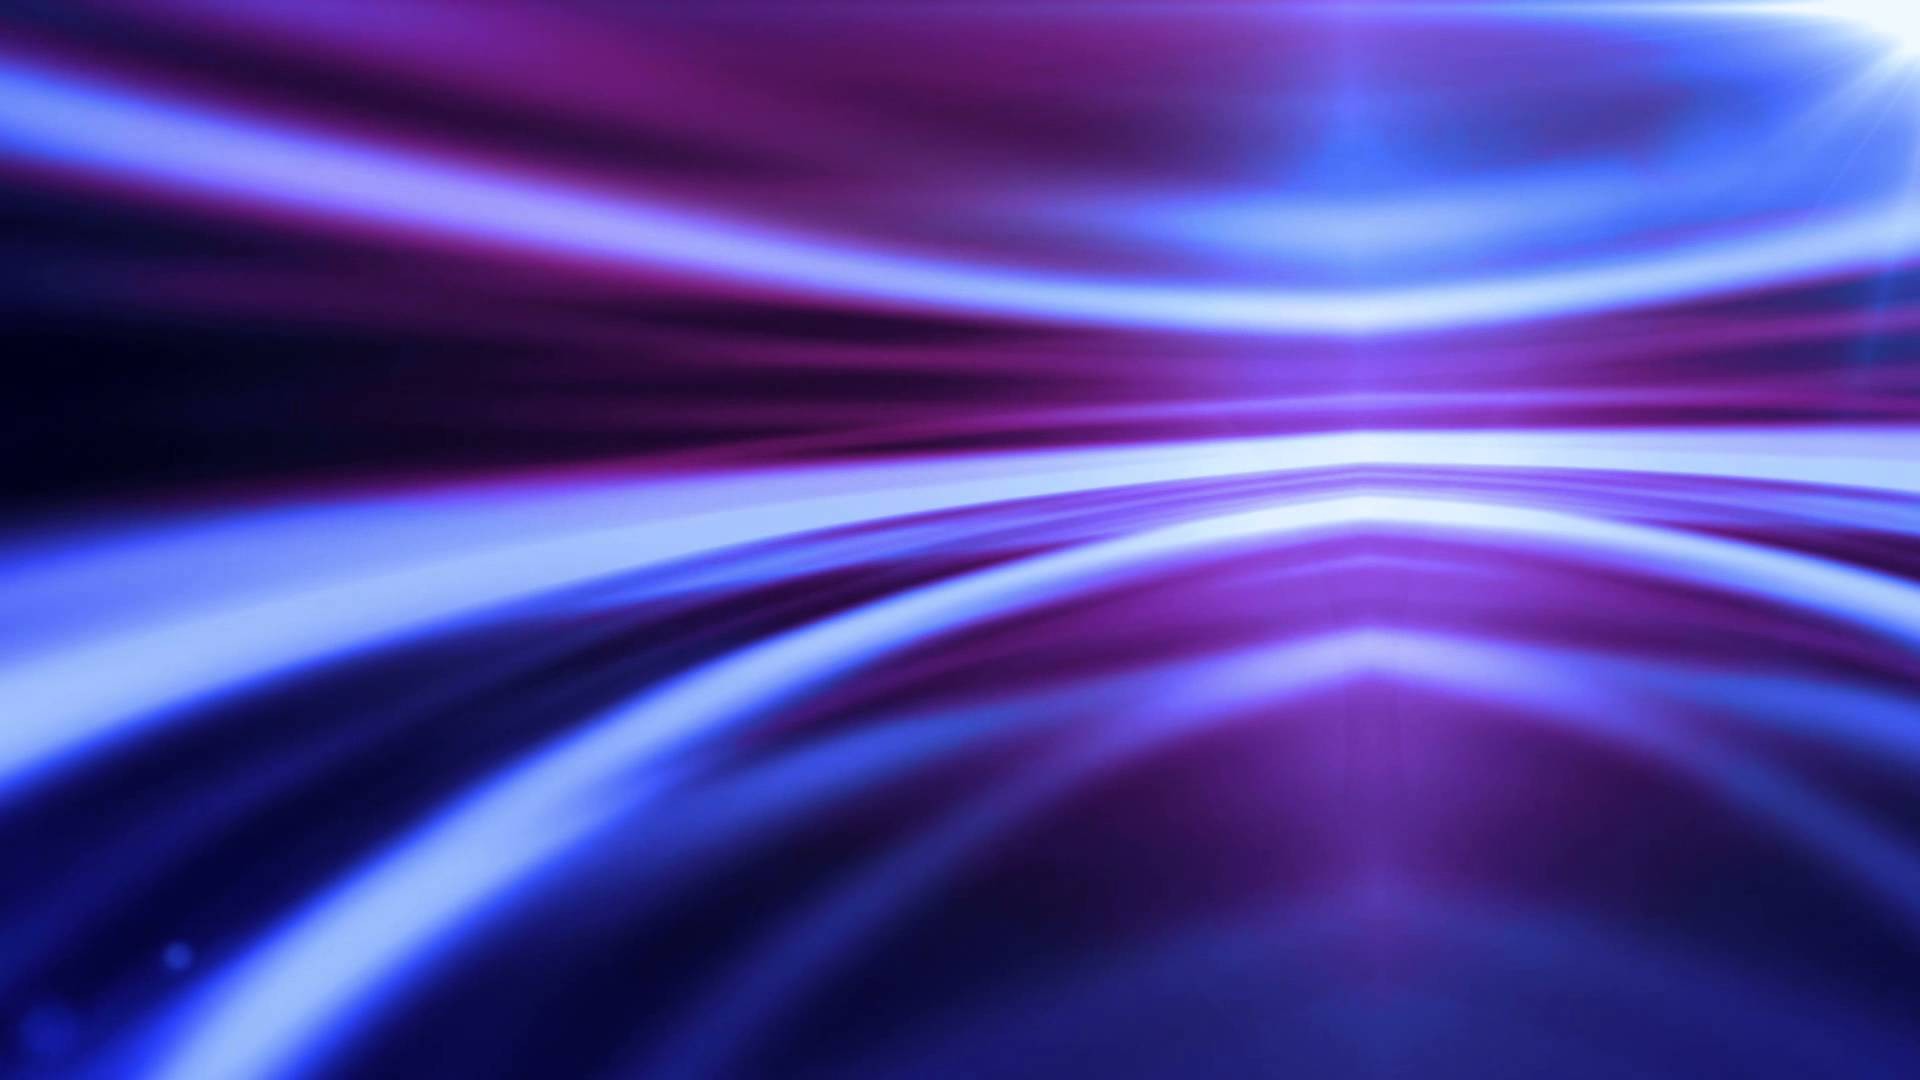  Abstract  background   Download free  cool full HD 